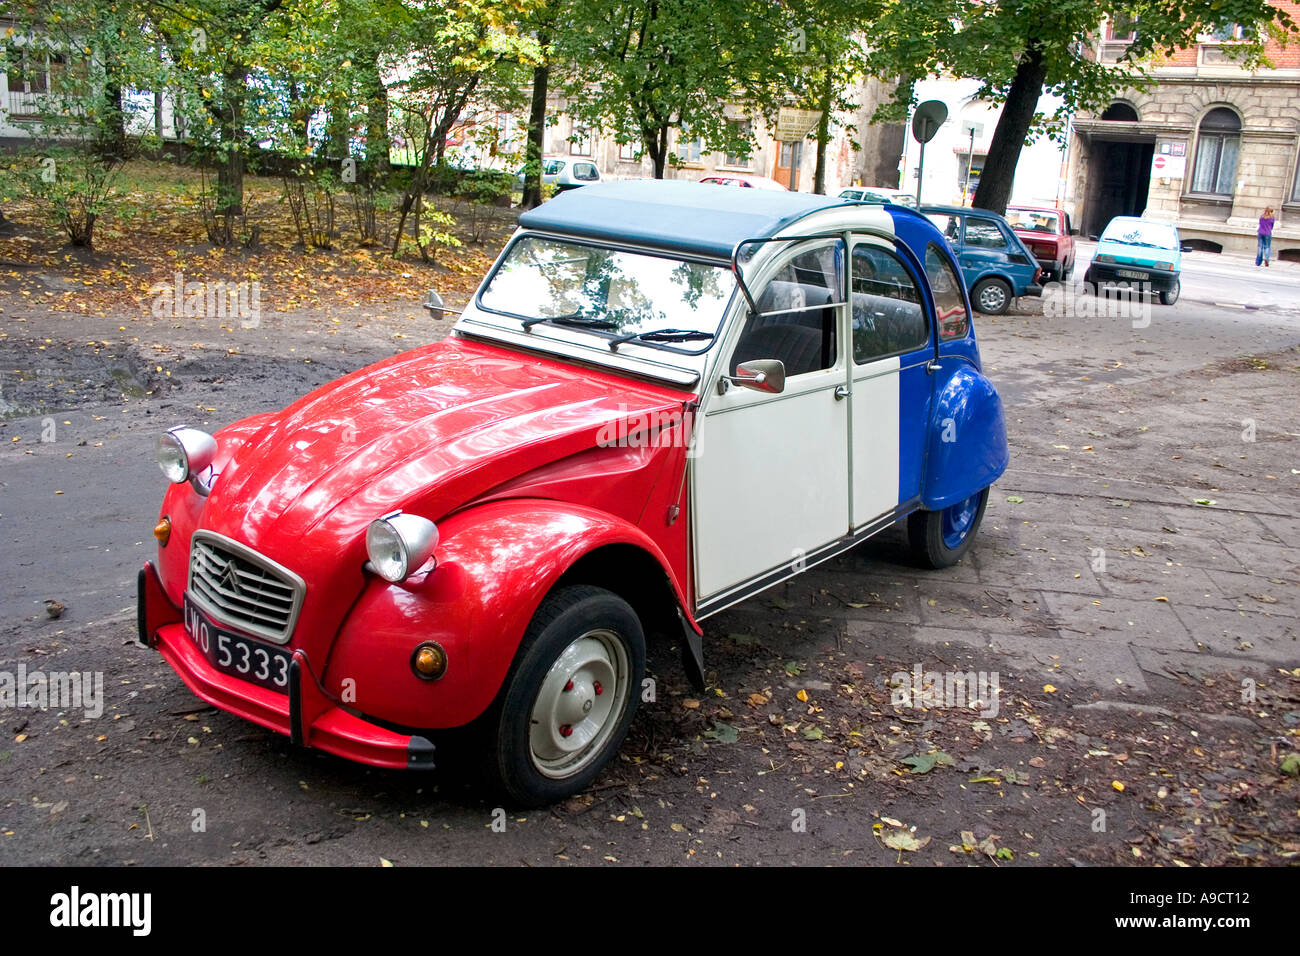 Beautiful red white and blue Citroen 2CV or French Deux Chevaux auto parked in courtyard. Lodz Poland Stock Photo